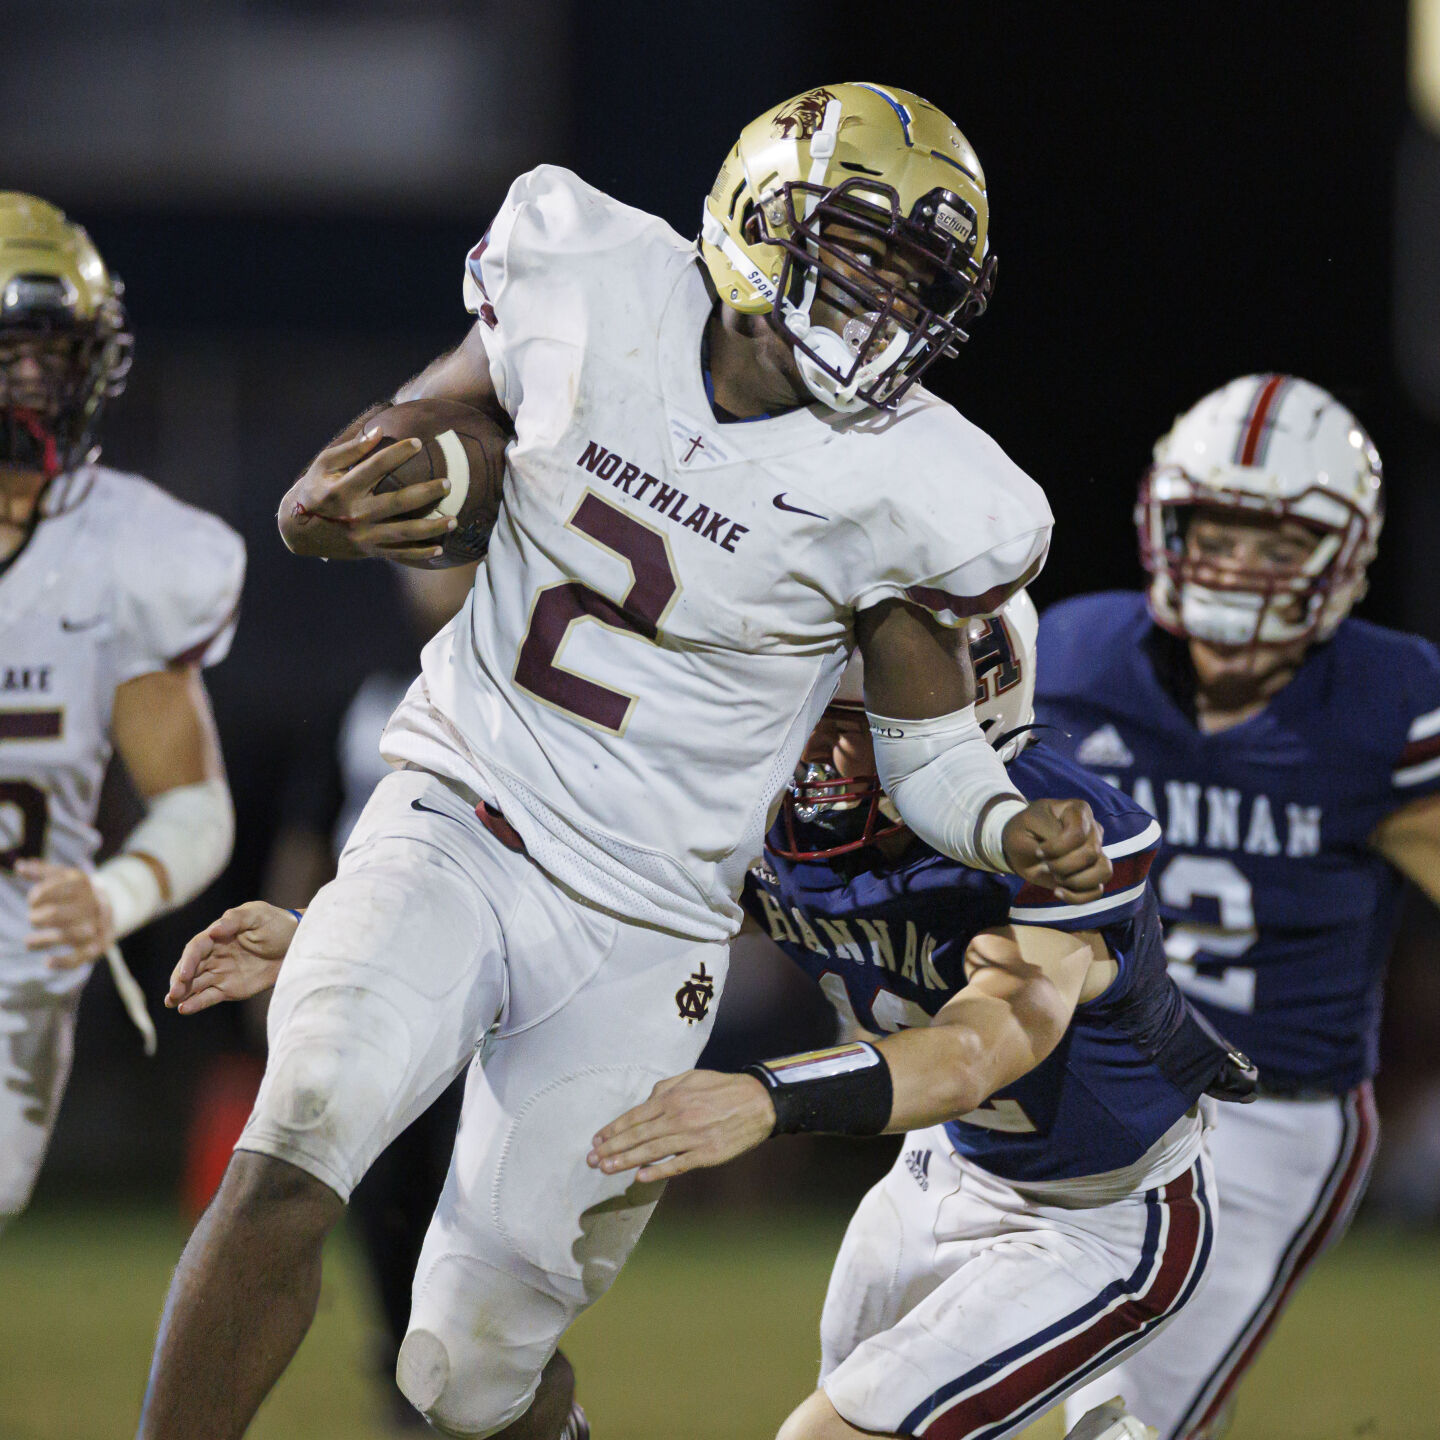 Northlake Christian Defeats Springfield 45-0, Casanave Shines on Offensive